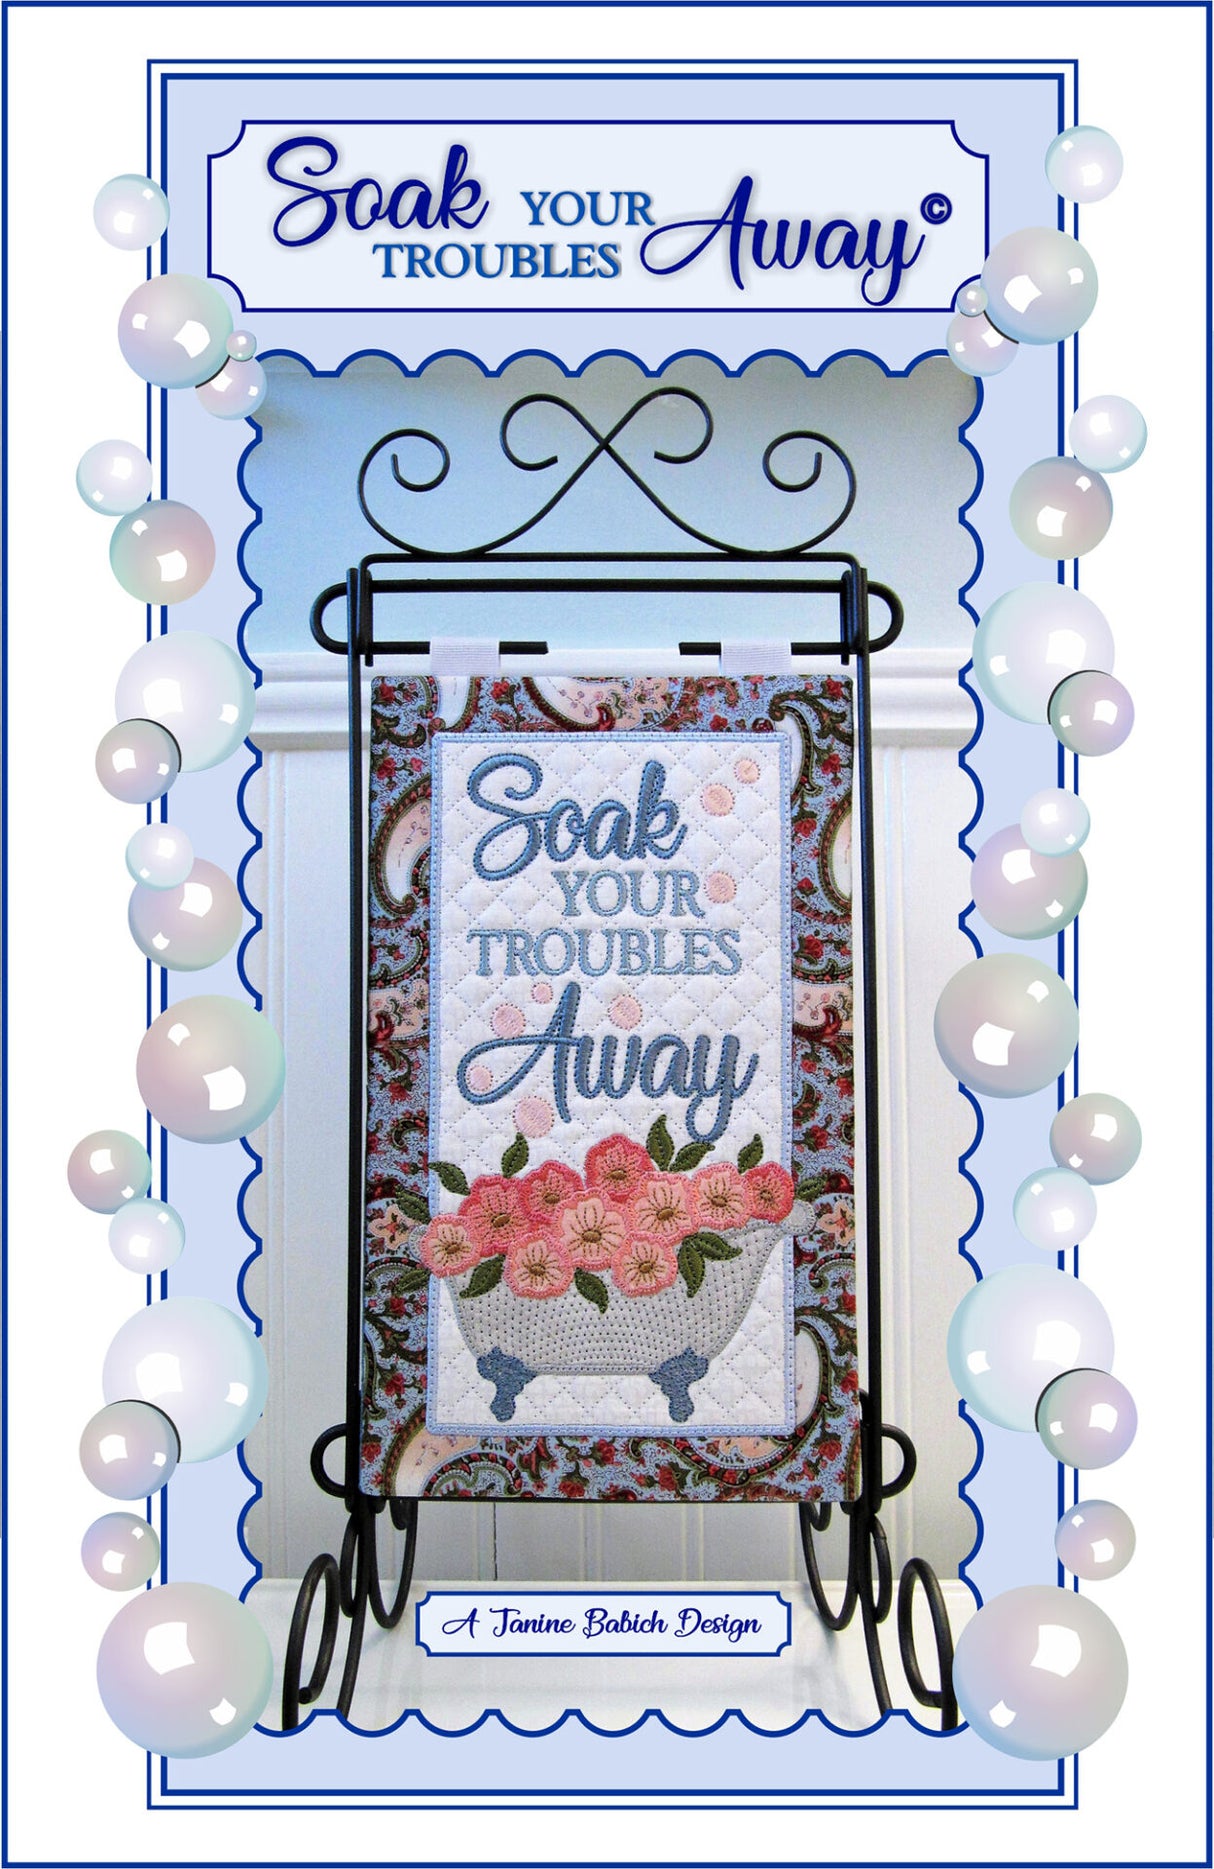 Soak Your Troubles Away Table Top Display Downloadable Pattern by Janine Babich